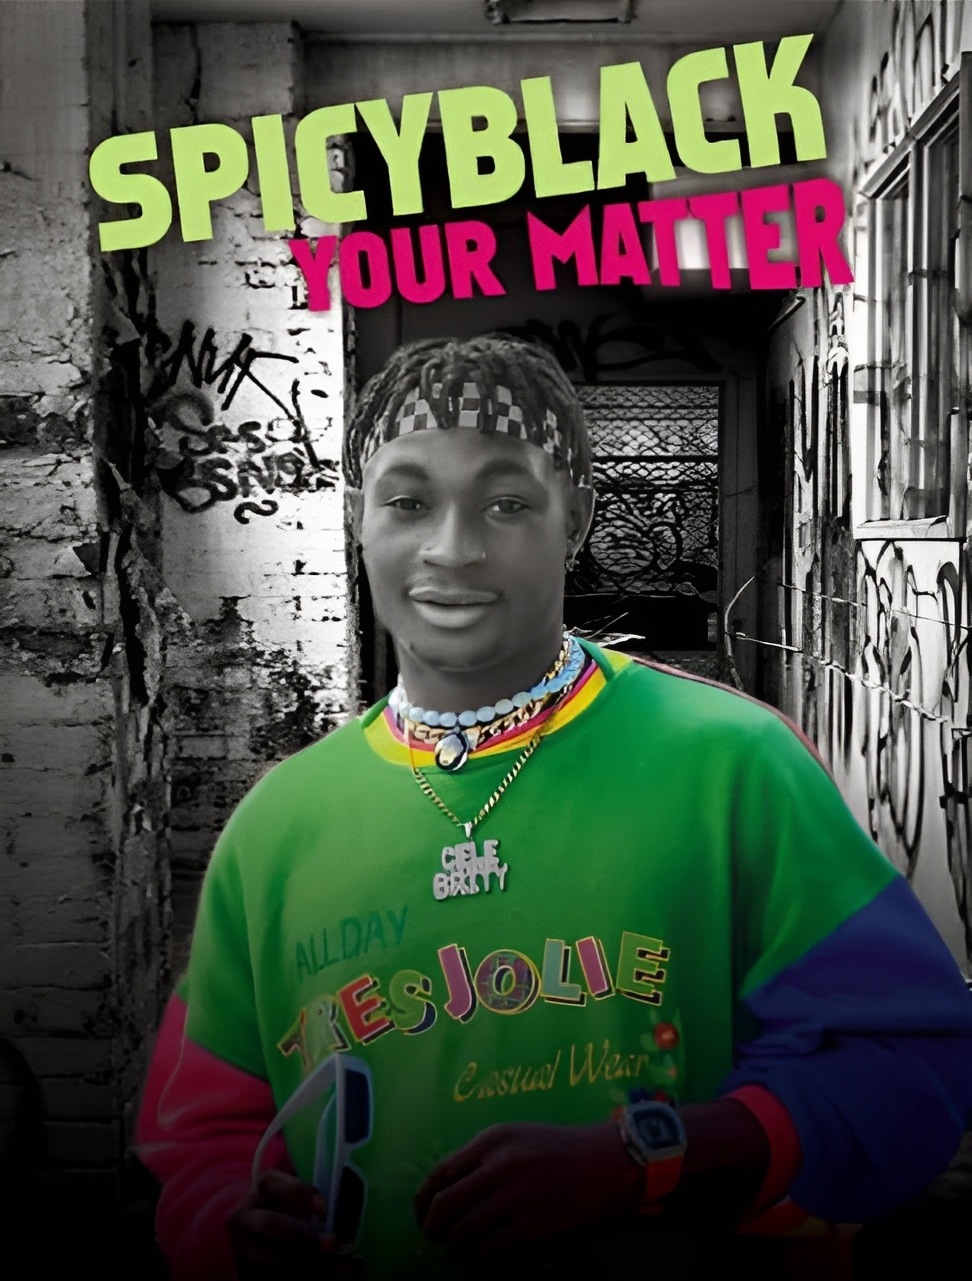 Spicy Black - Your Matter Mp3 Download